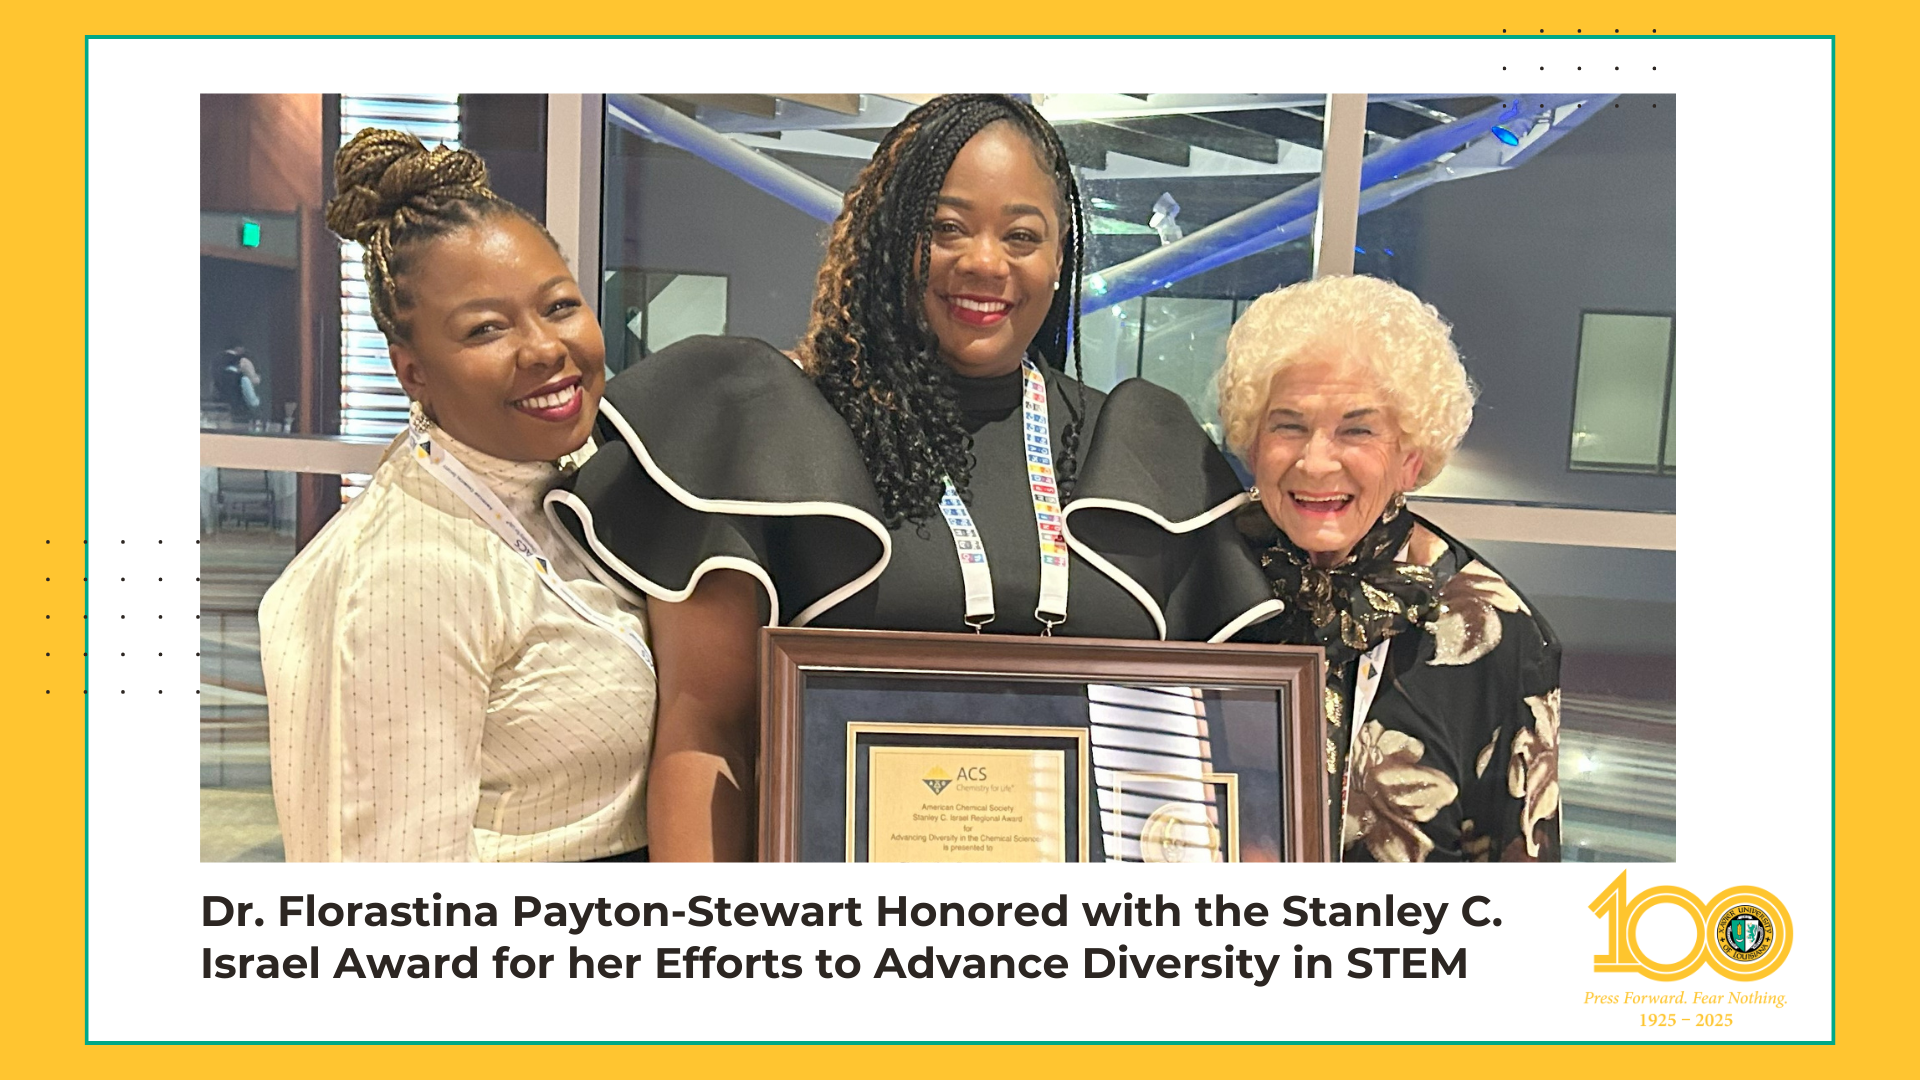 Dr. Florastina Payton-Stewart Honored with the Stanley C. Israel Award for her Efforts to Advance Diversity in STEM